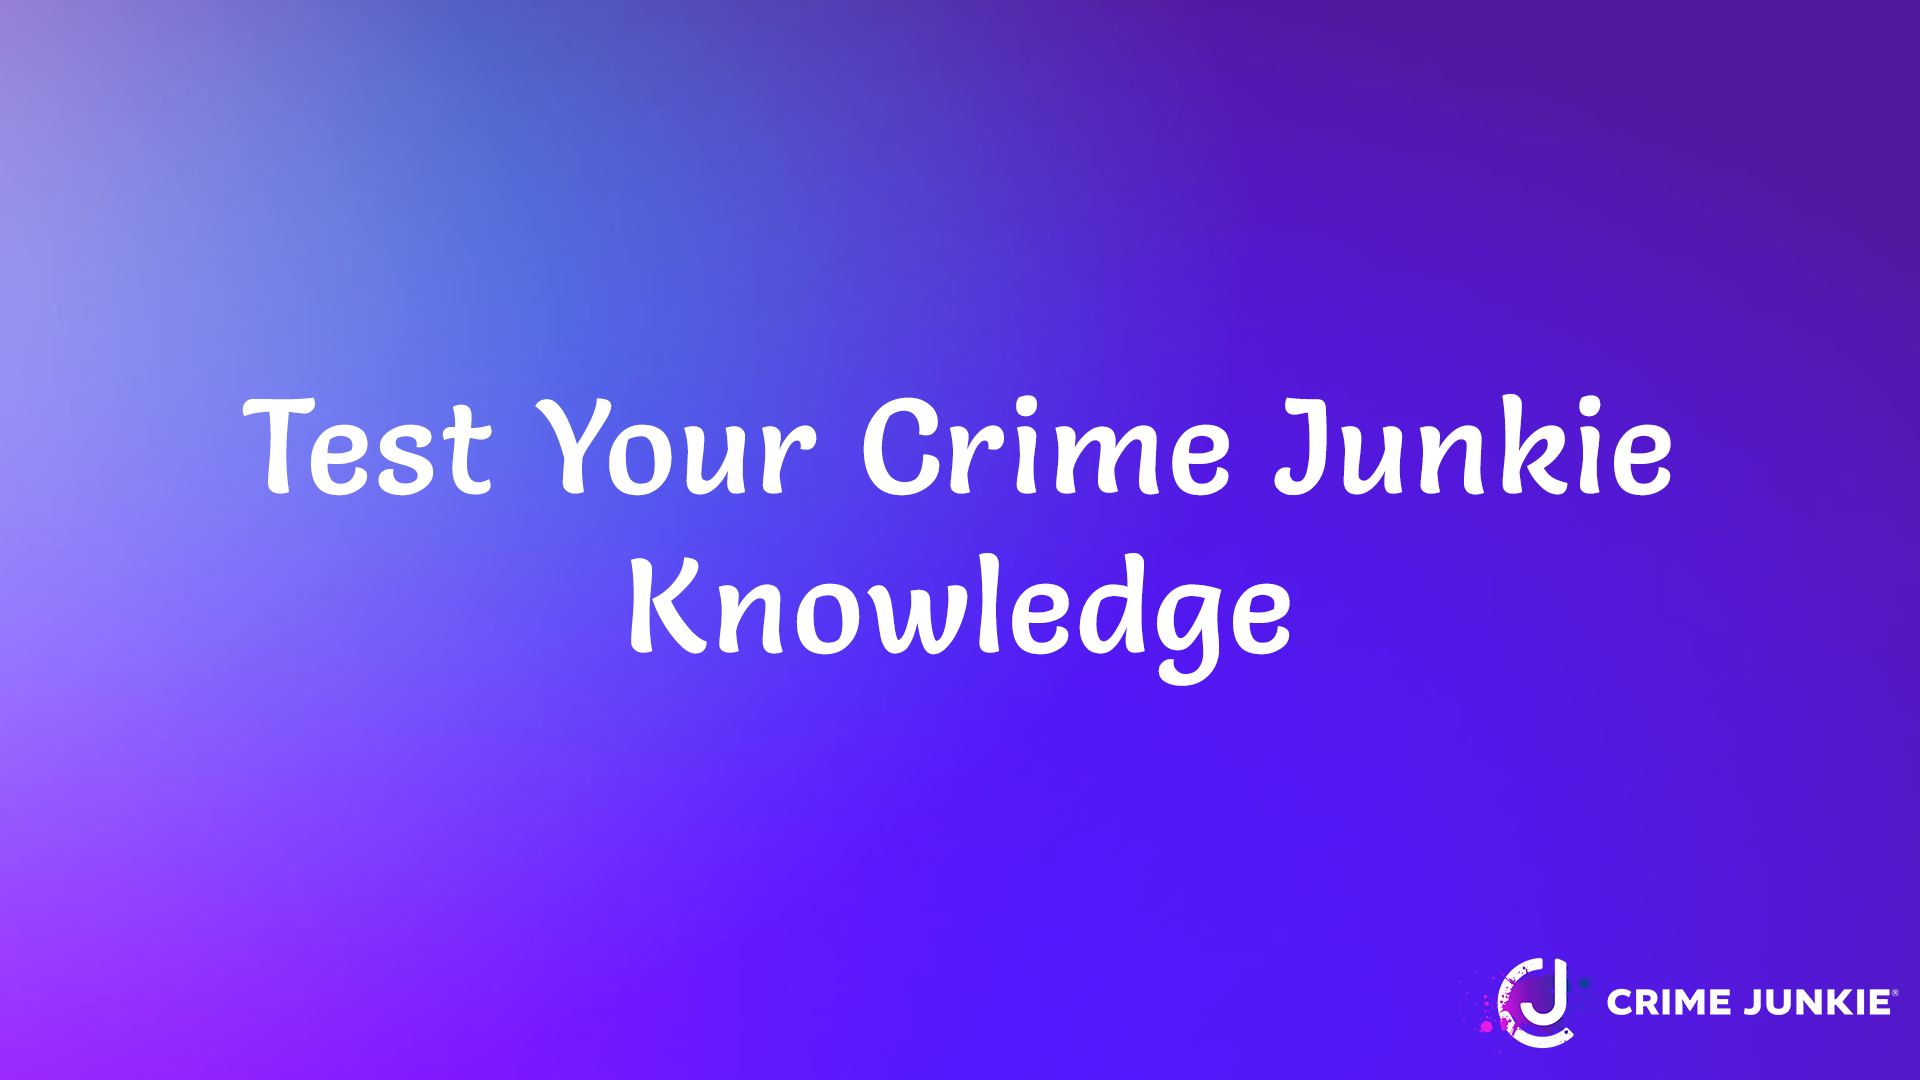 Test Your Crime Junkie Knowledge